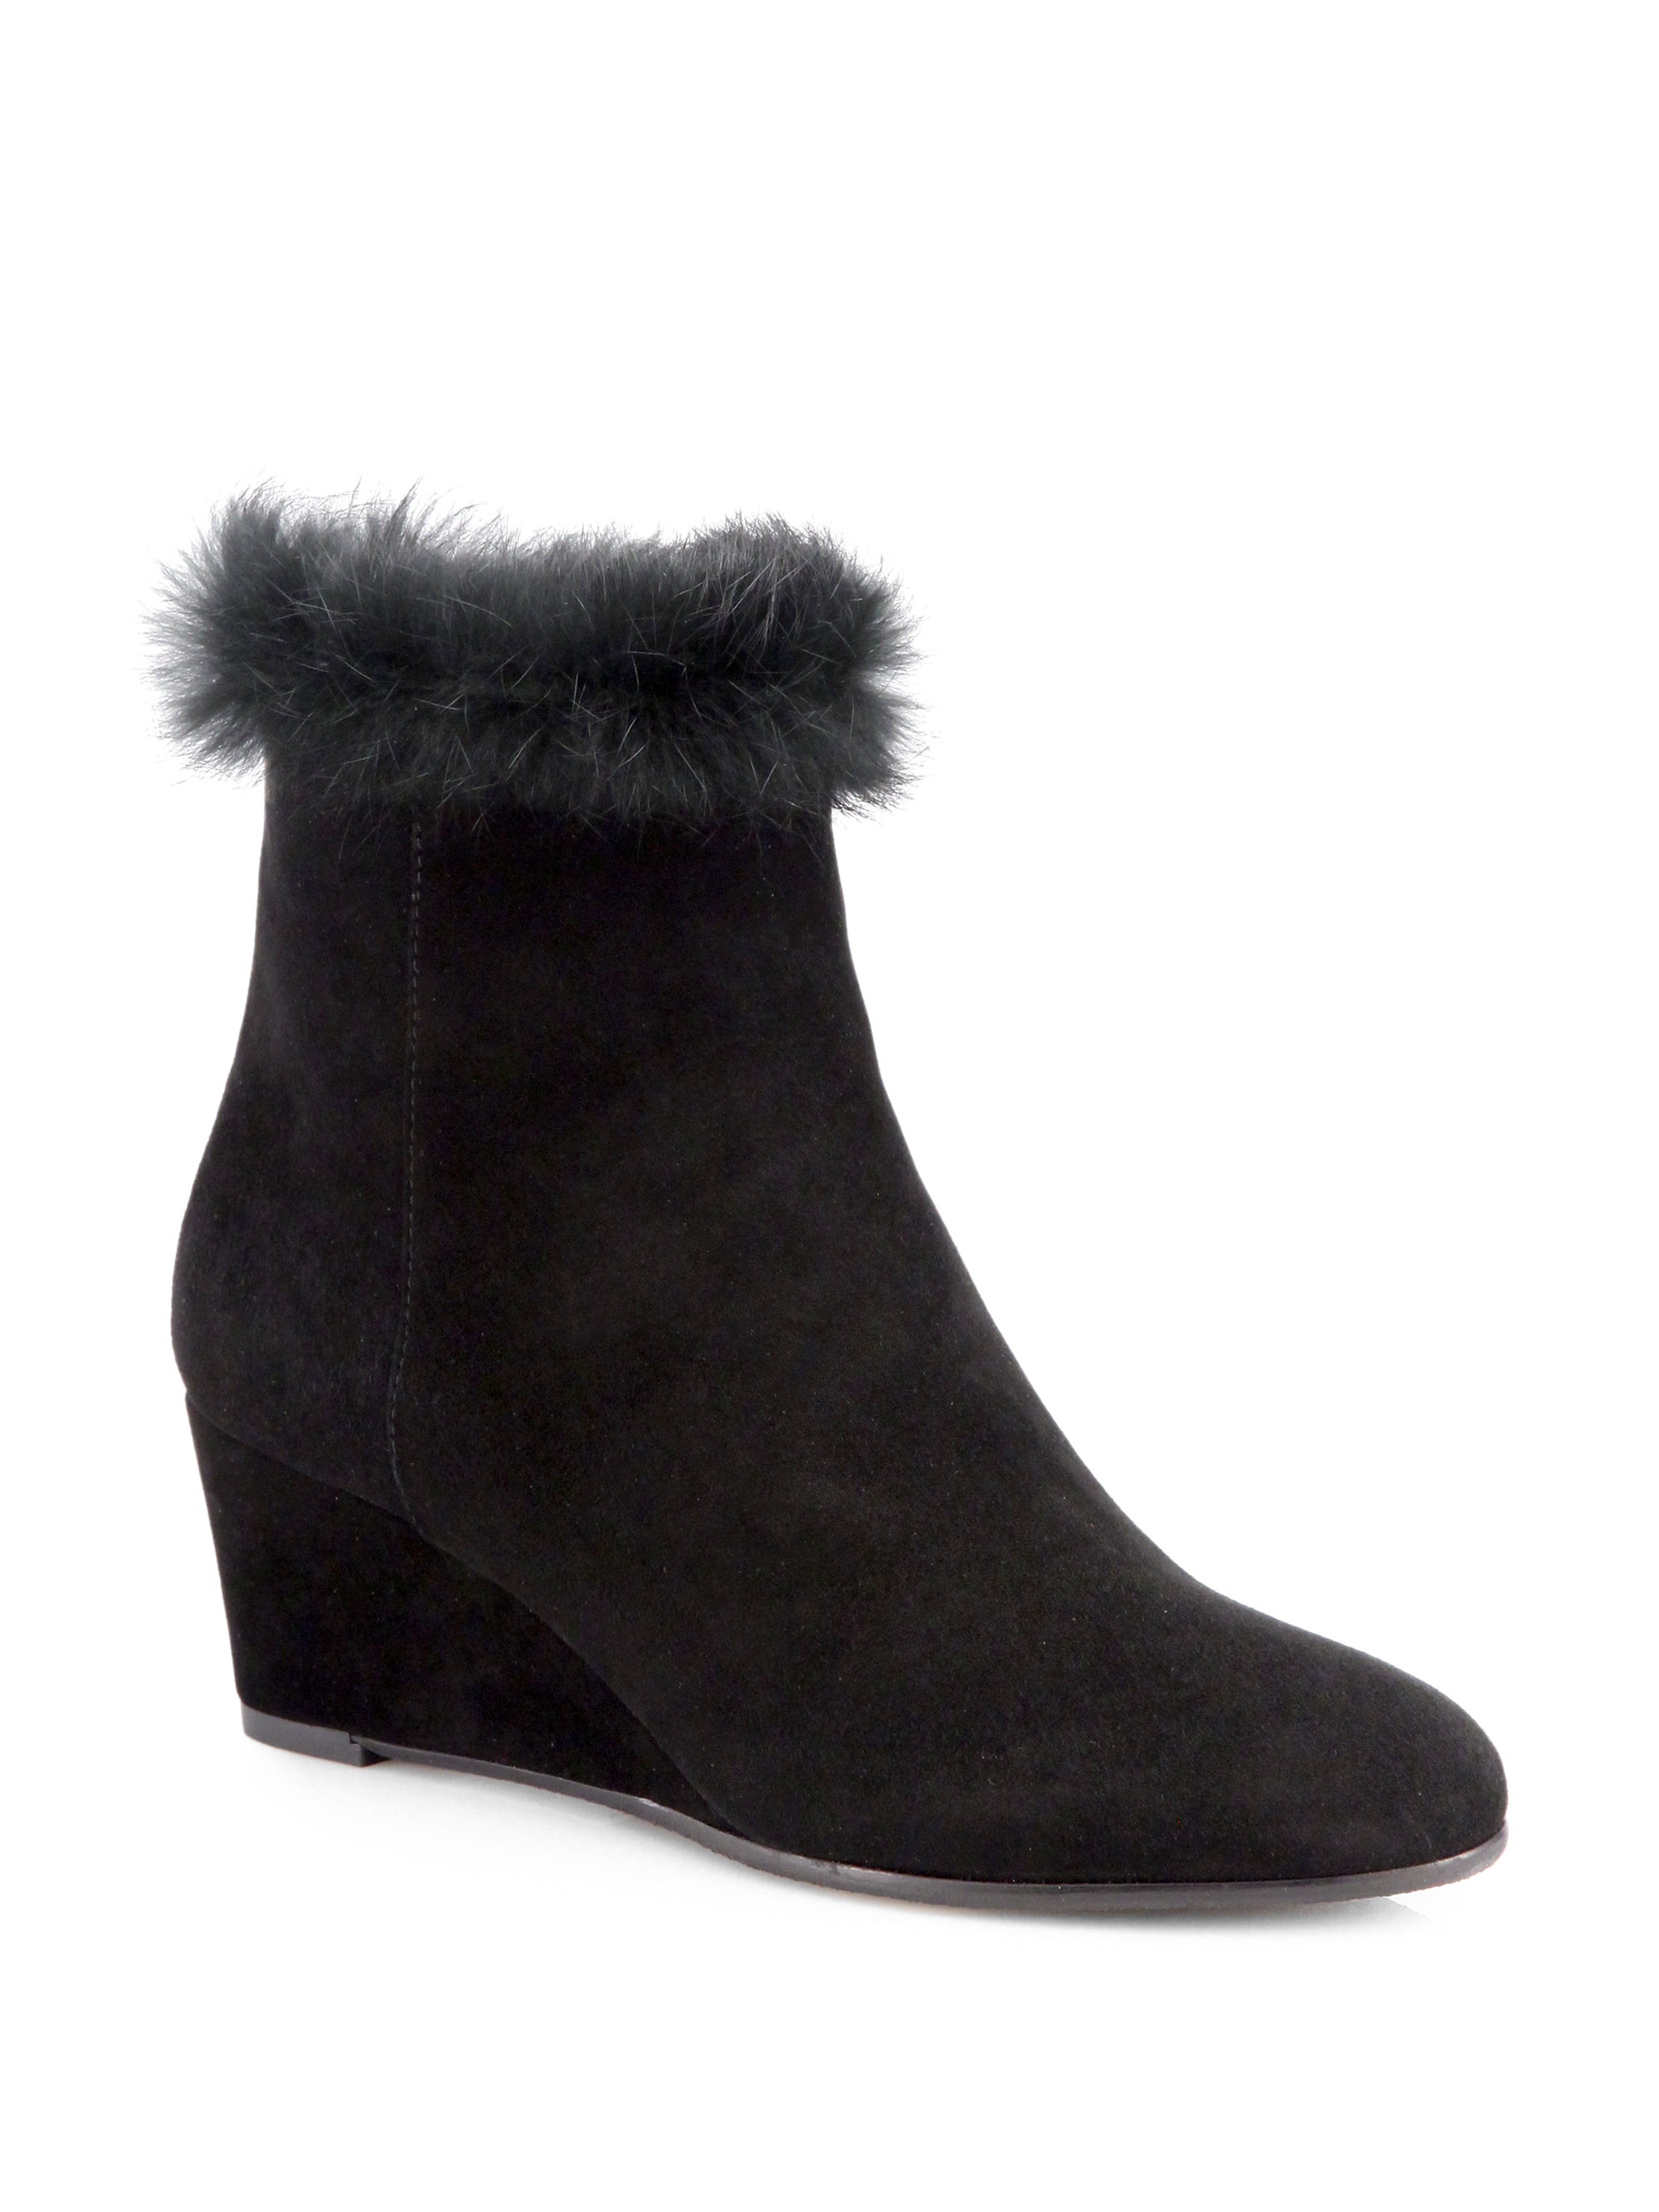 Aquatalia By Marvin K Jinx Fur-trimmed Suede Ankle Boots in Black | Lyst